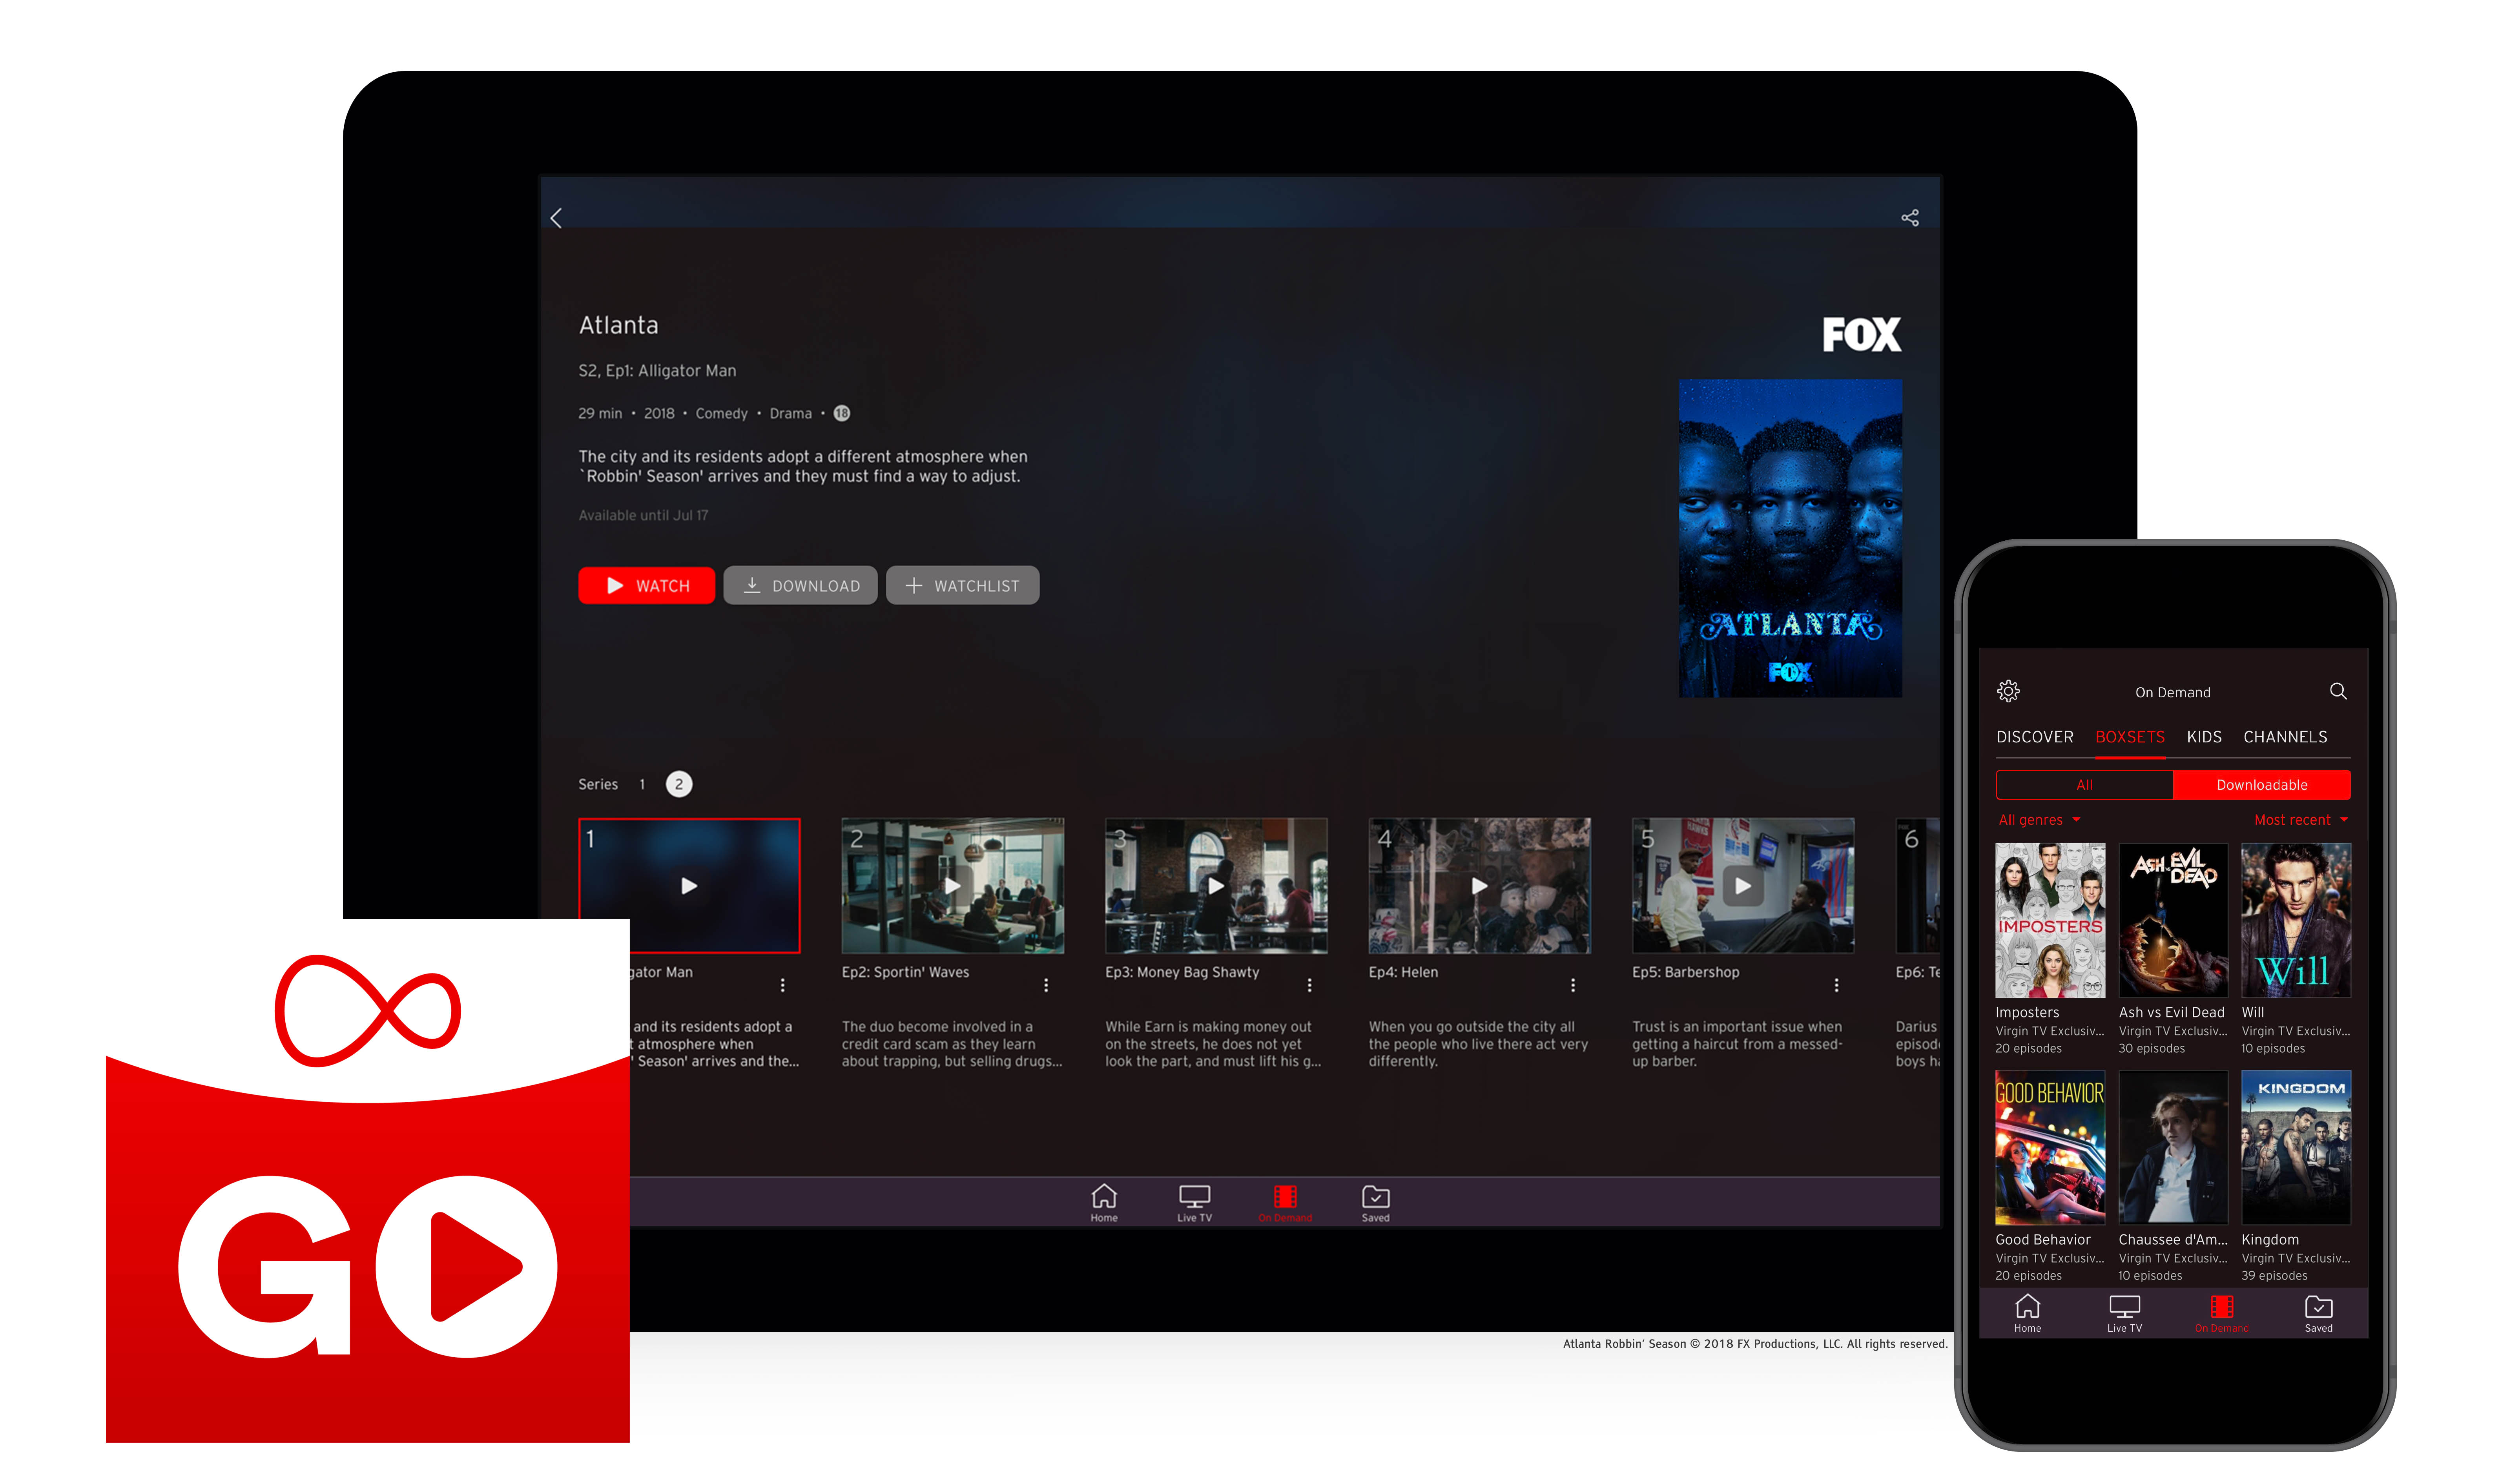 42 Best Images Live Tv App Download - TVPlayer brings a new UWP TV streaming app to UK Windows ...